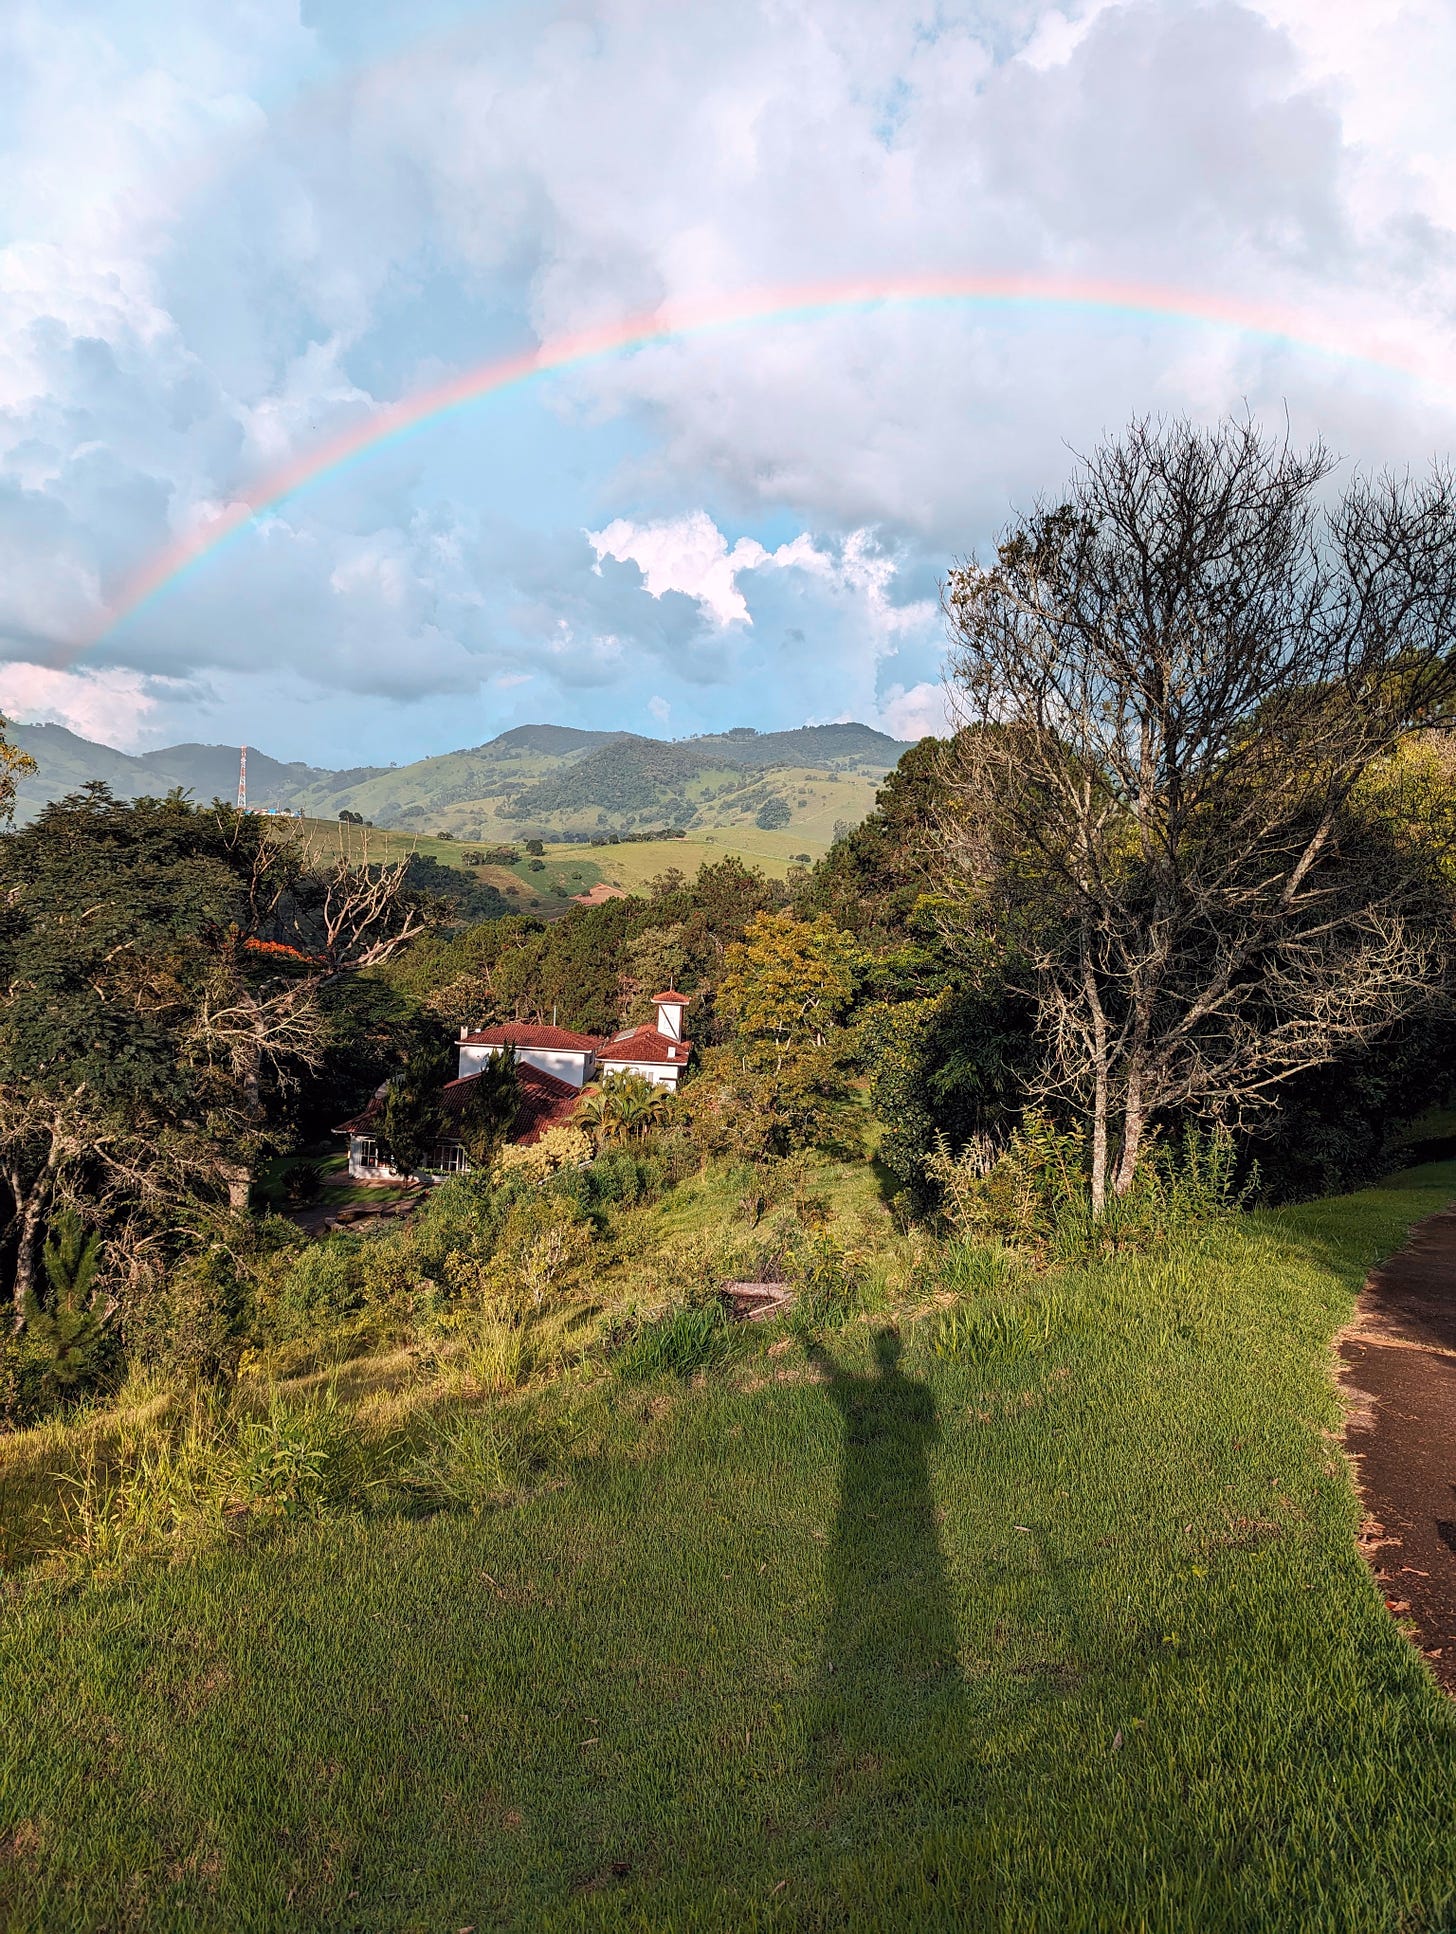 The view of the guesthouse Pousada Dona Marica from the top of a hill, with trees and mountains in the background and a rainbow crossing the sky. The shadow of the photographer can be seen on the grass.